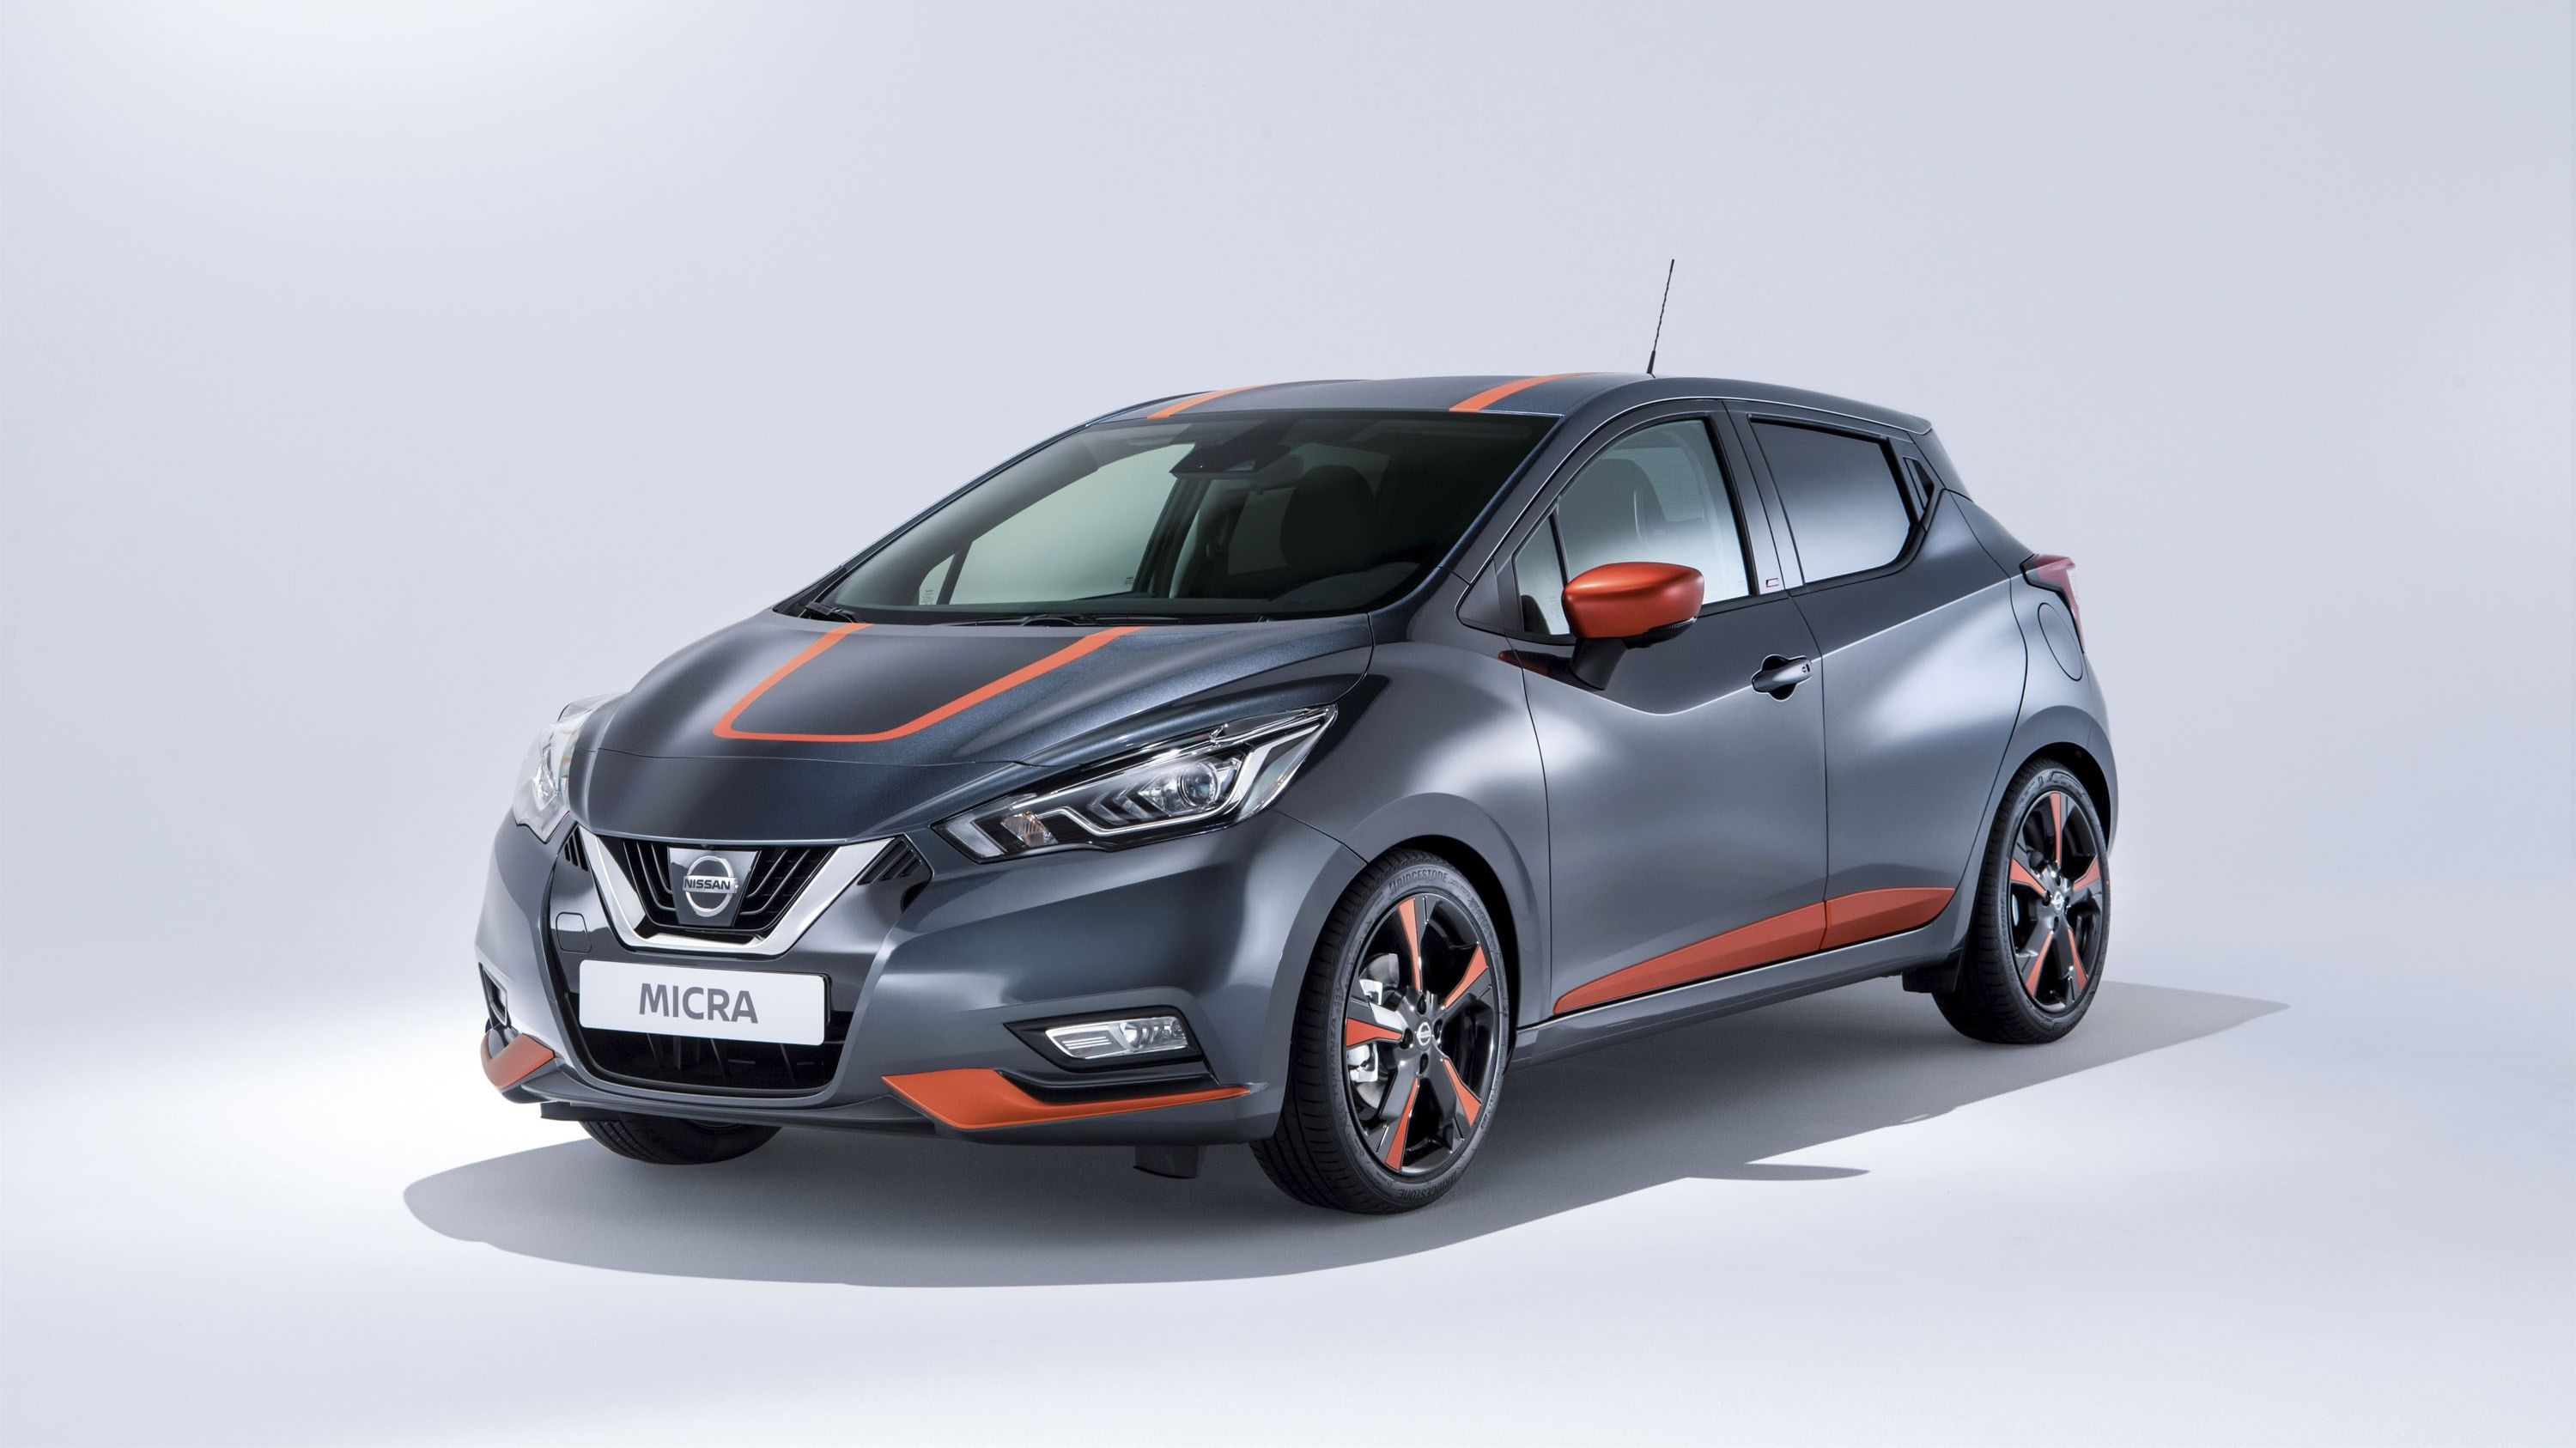 2017 Nissan Micra Bose Personal Edition